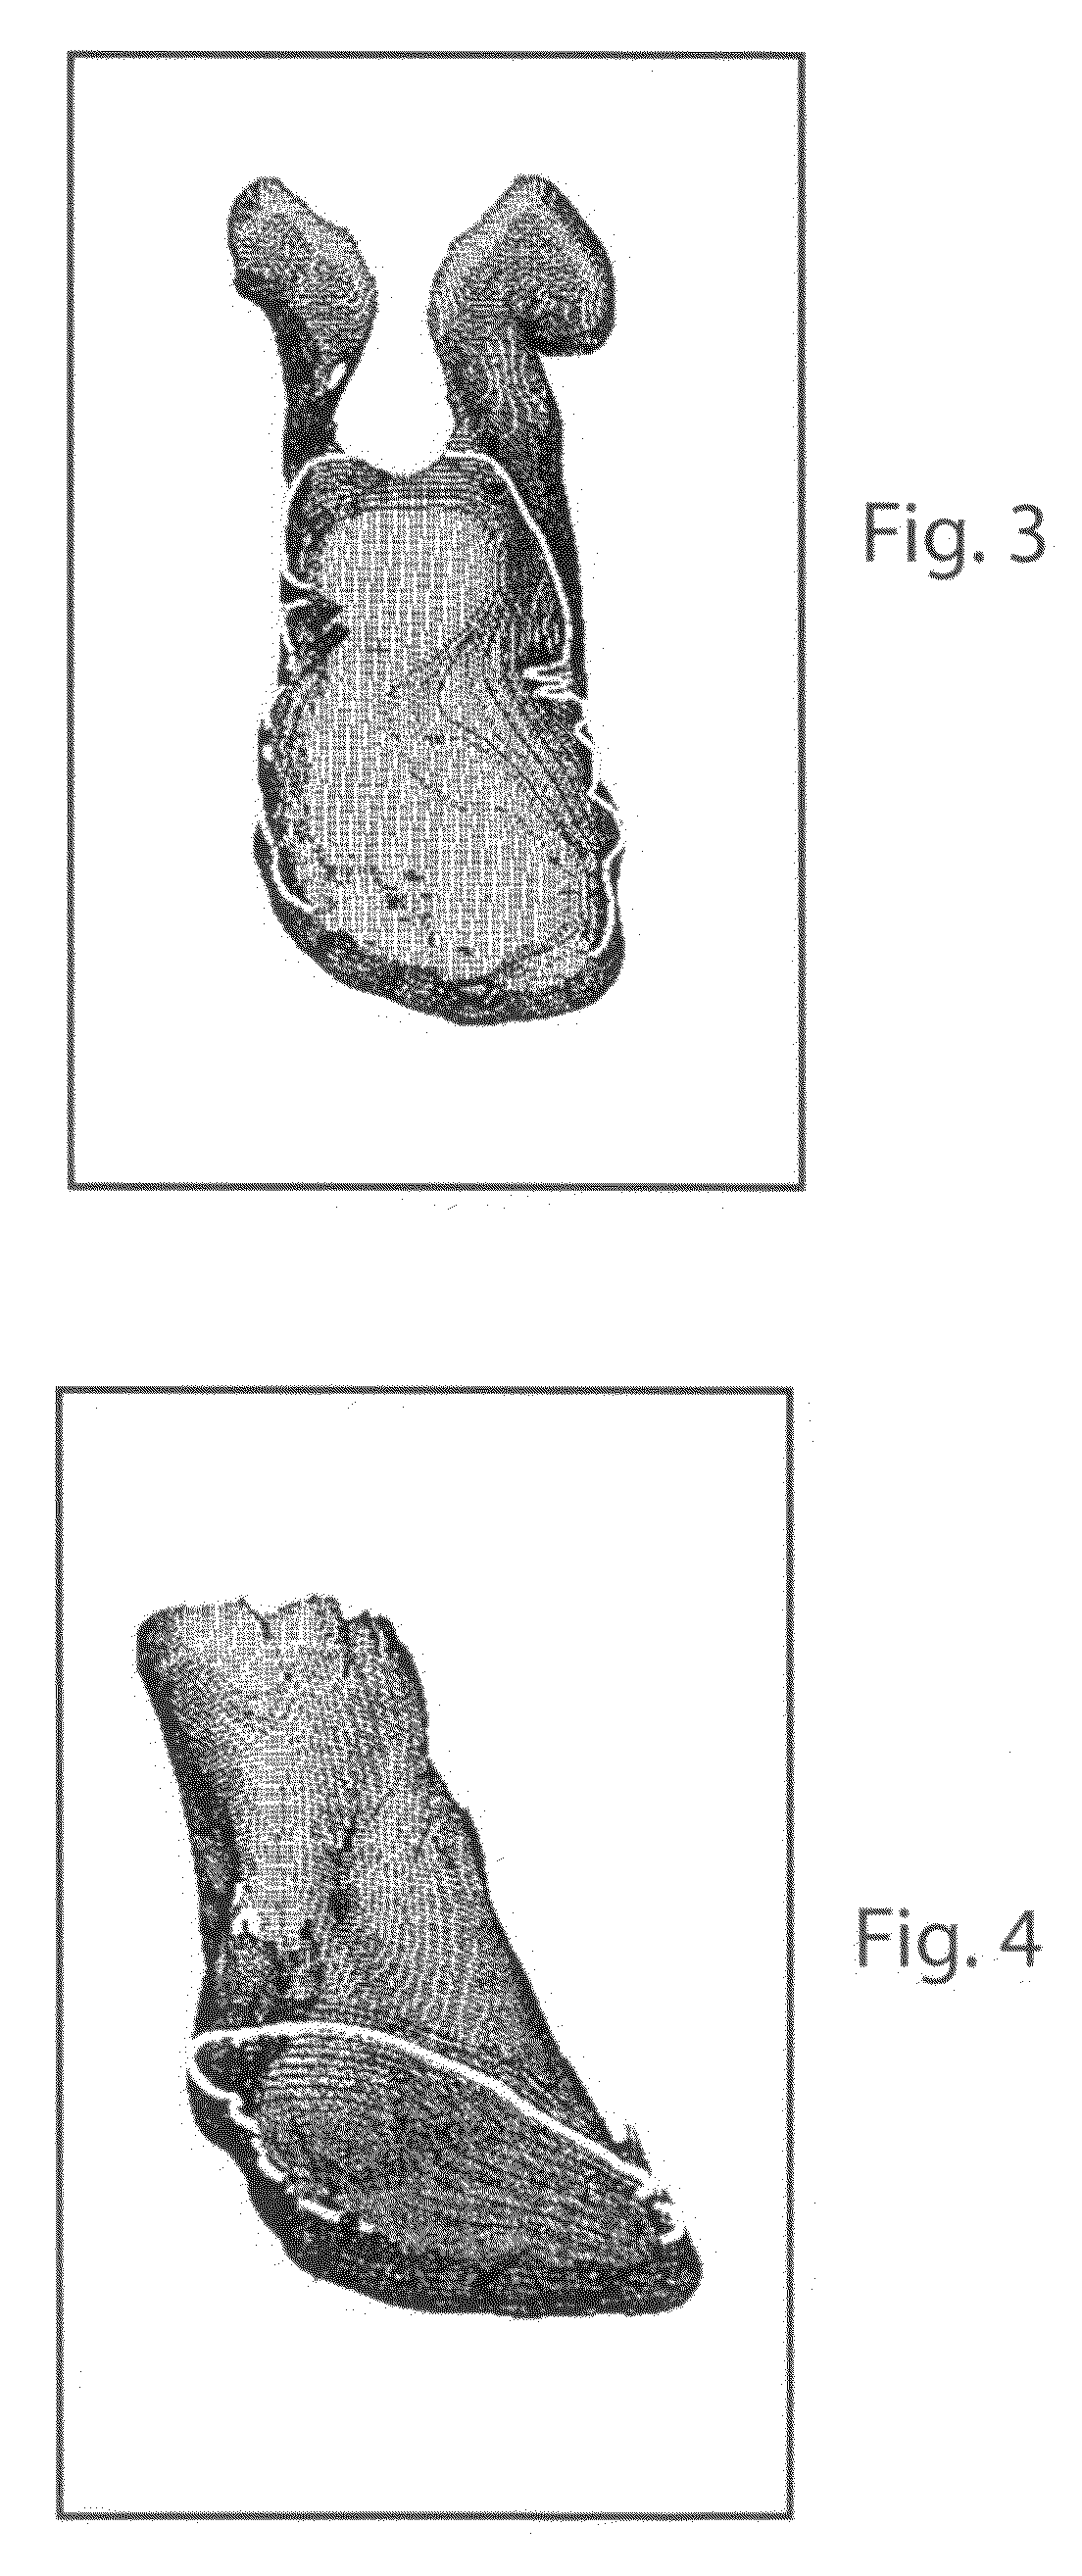 System and method for evaluating the needs of a person and manufacturing a custom orthotic device